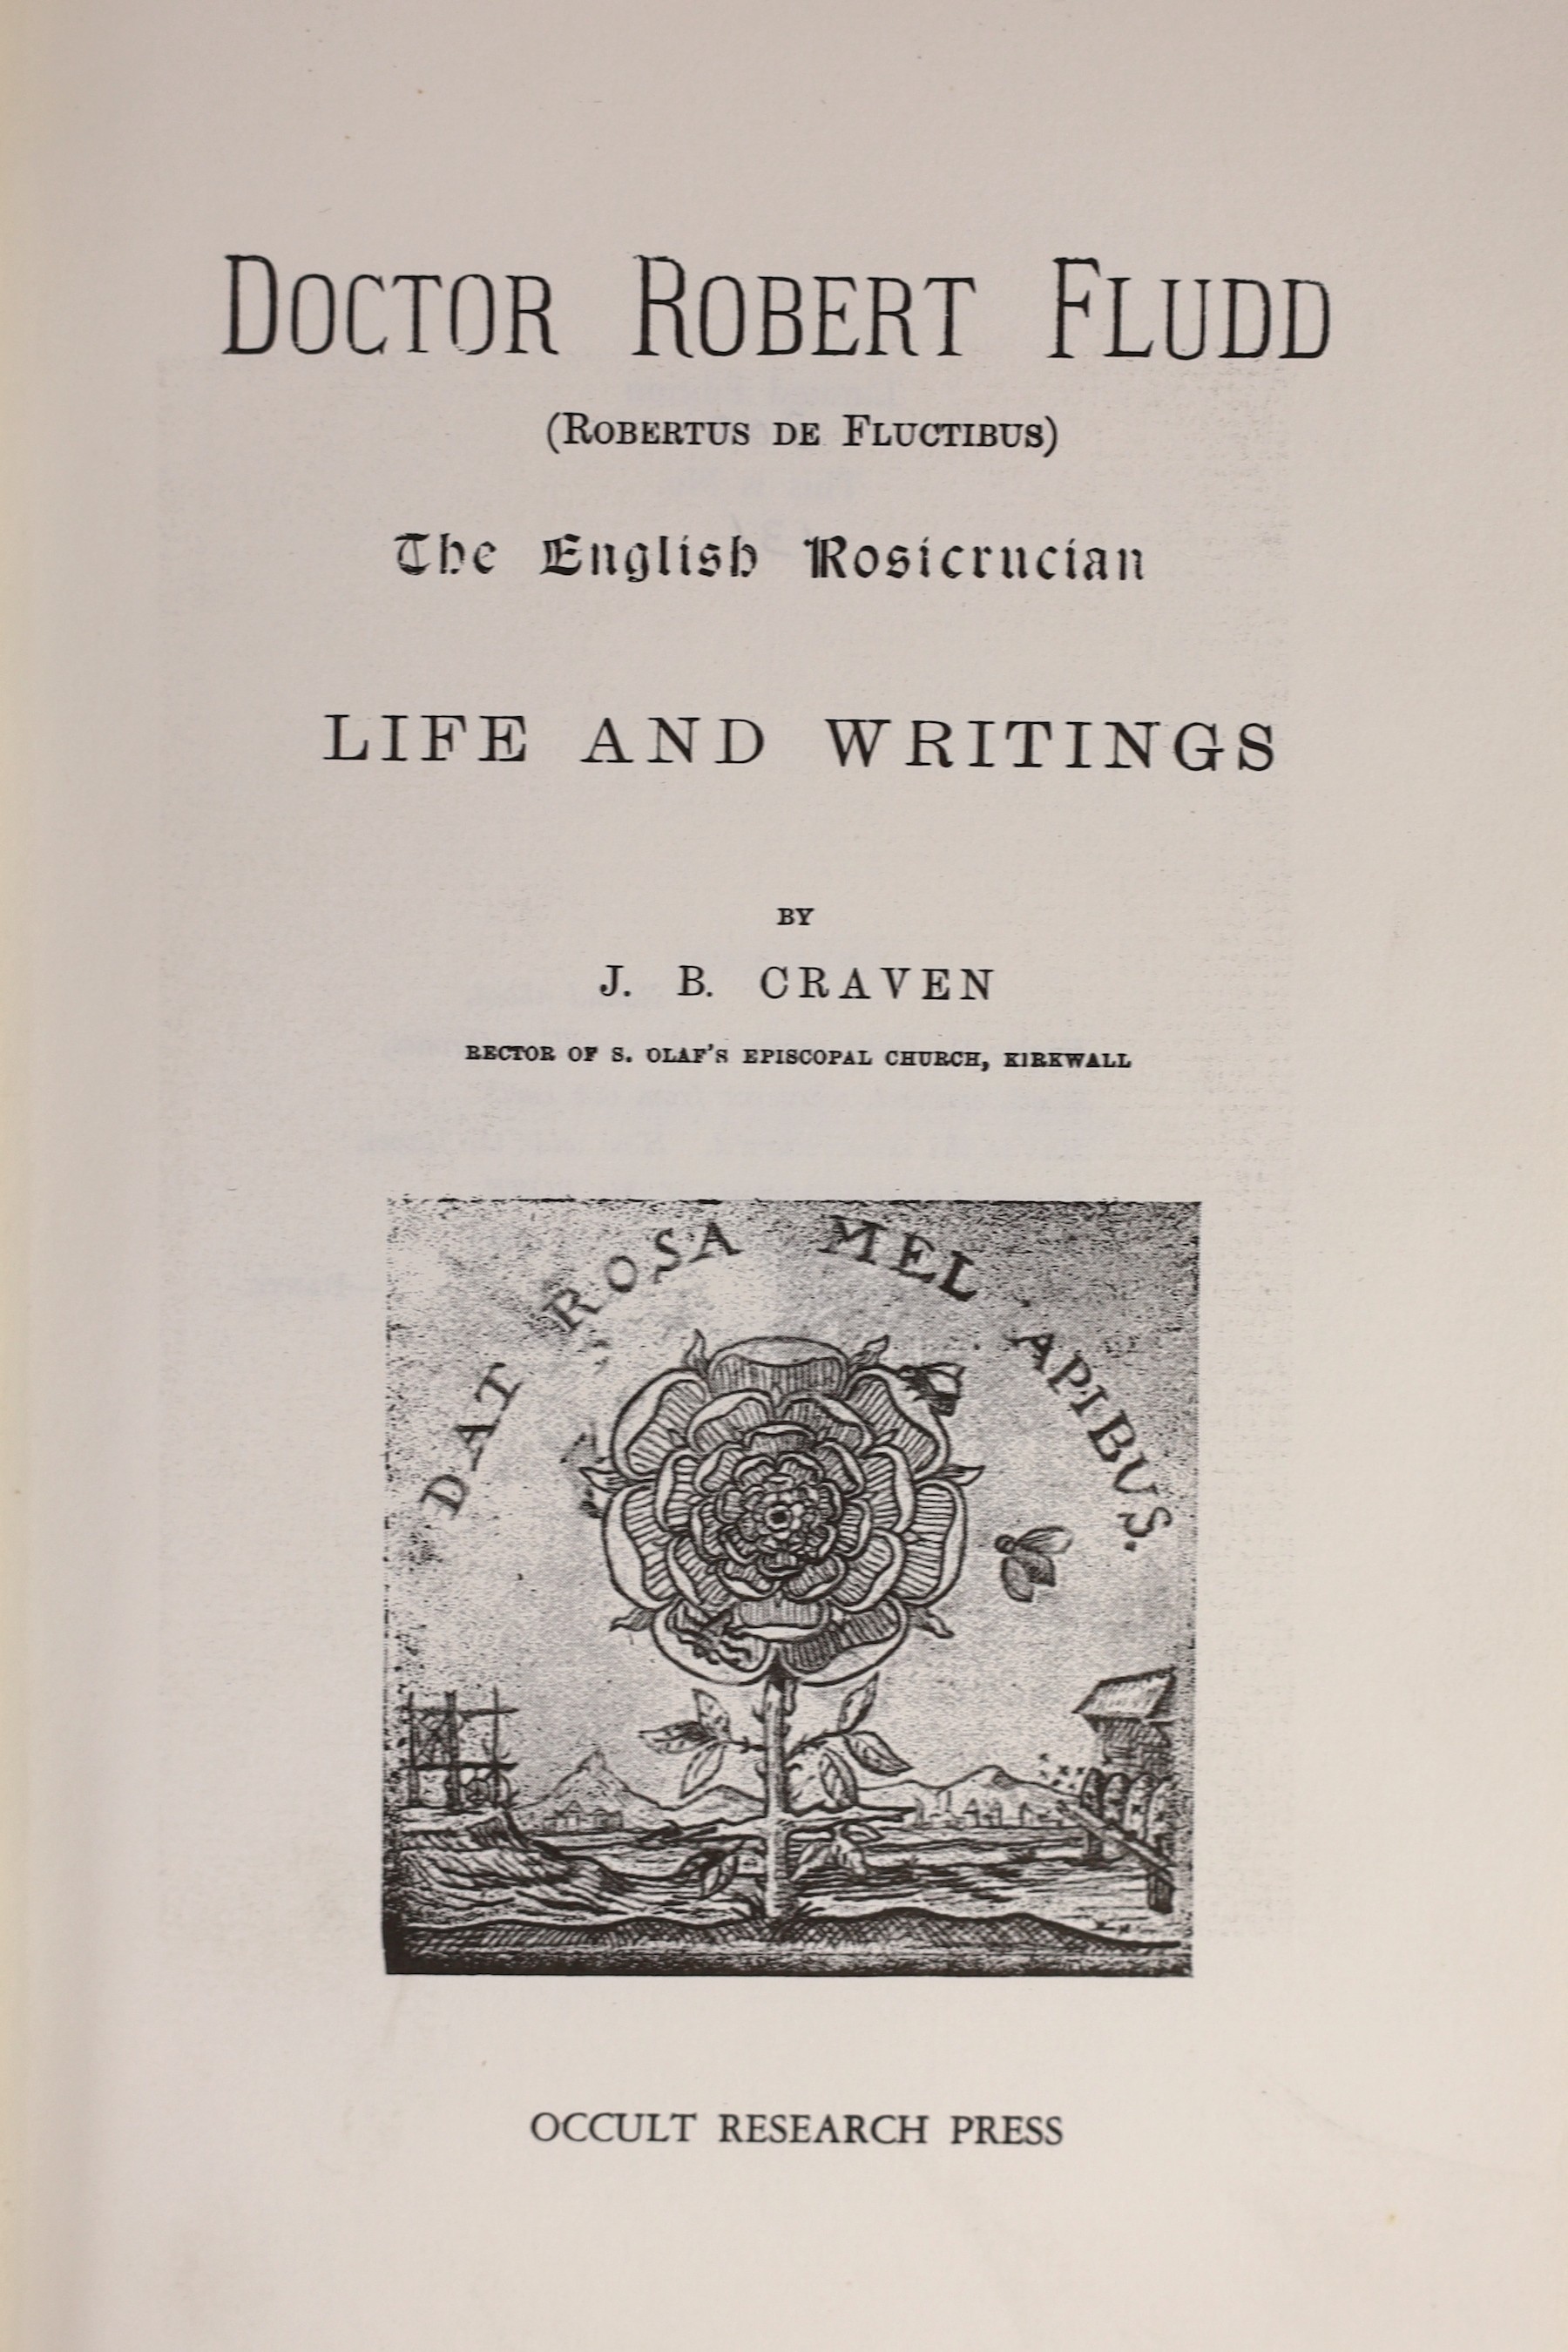 Craven, J.B - Dr Robert Fludd. …The English Rosicrucian - Life and Writings, one of 300, 8vo, simulated crocodile skin, Occult Research Press, n.d; Hulme, Frederick Edward - A Series of Sketches from Nature, of Plant For